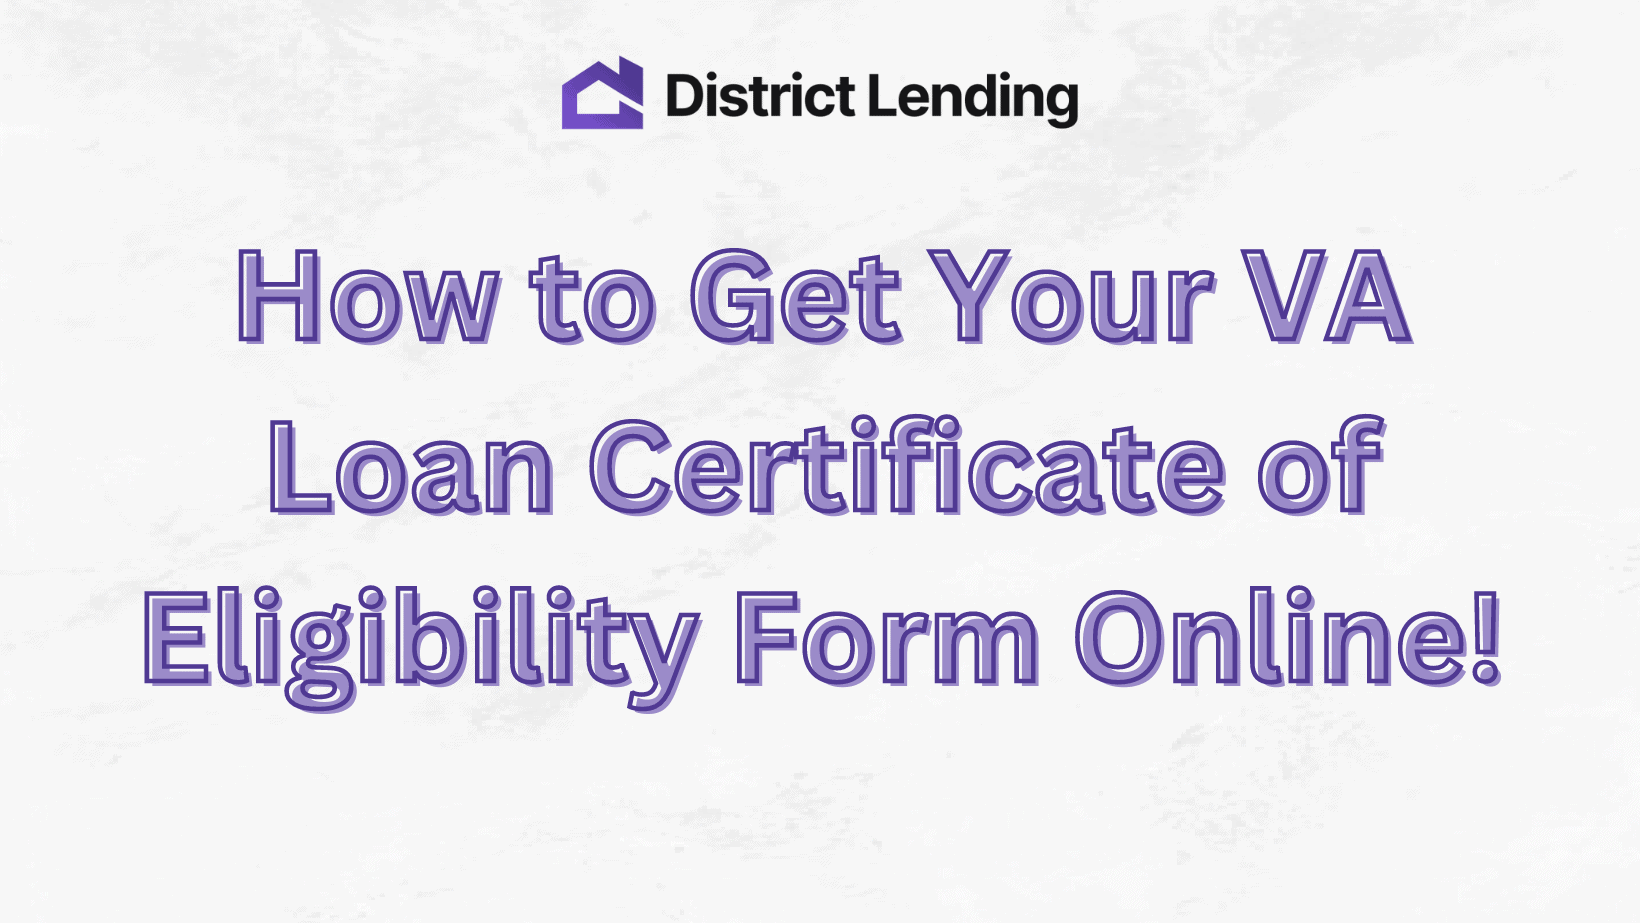 How to Get Your VA Loan Certificate of Eligibility Form Online Fast